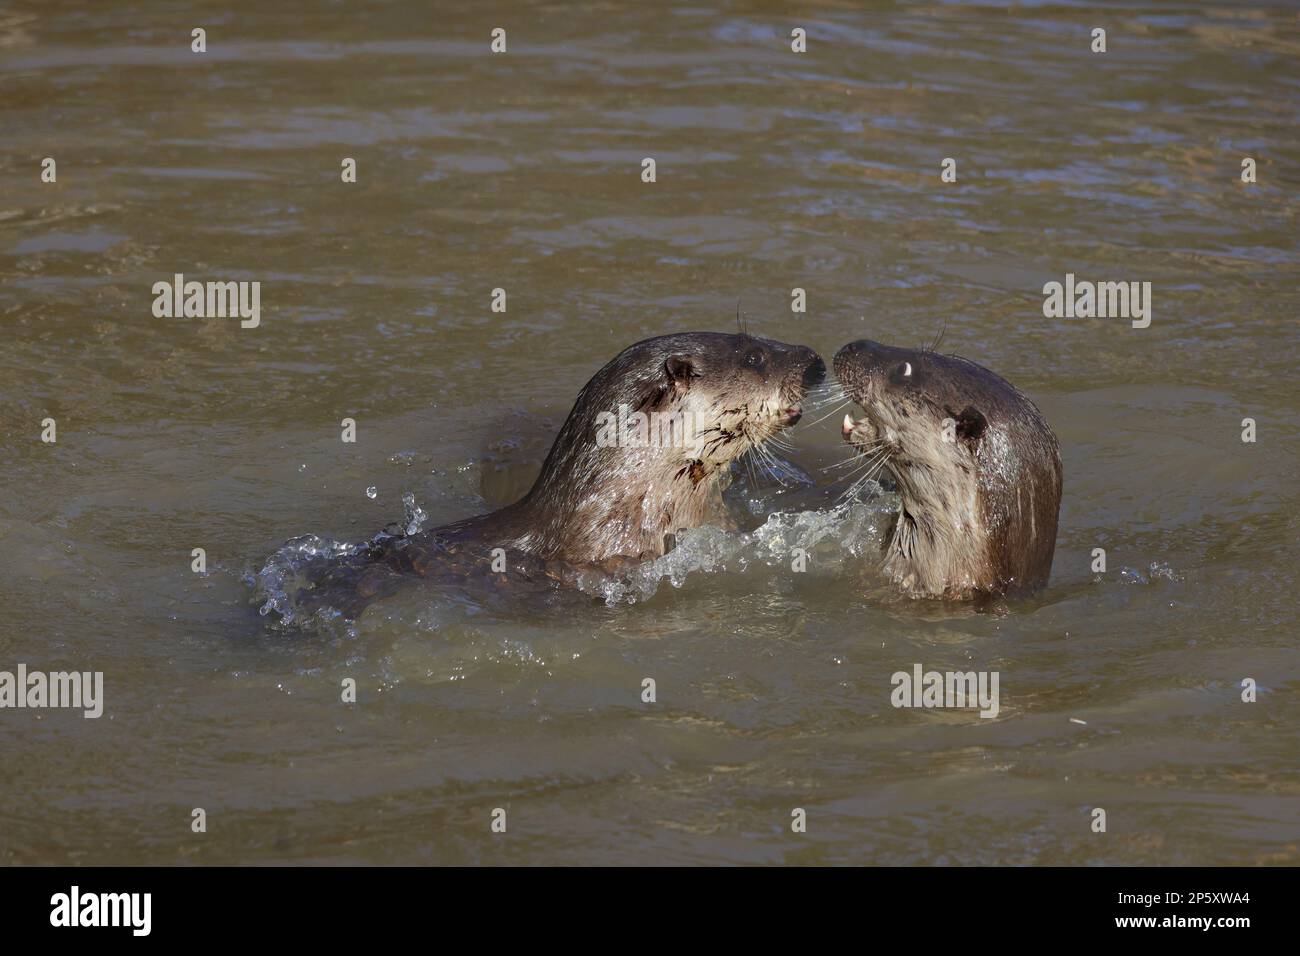 European river otter, European Otter, Eurasian Otter (Lutra lutra), two otters romping in the water, side view, Germany Stock Photo